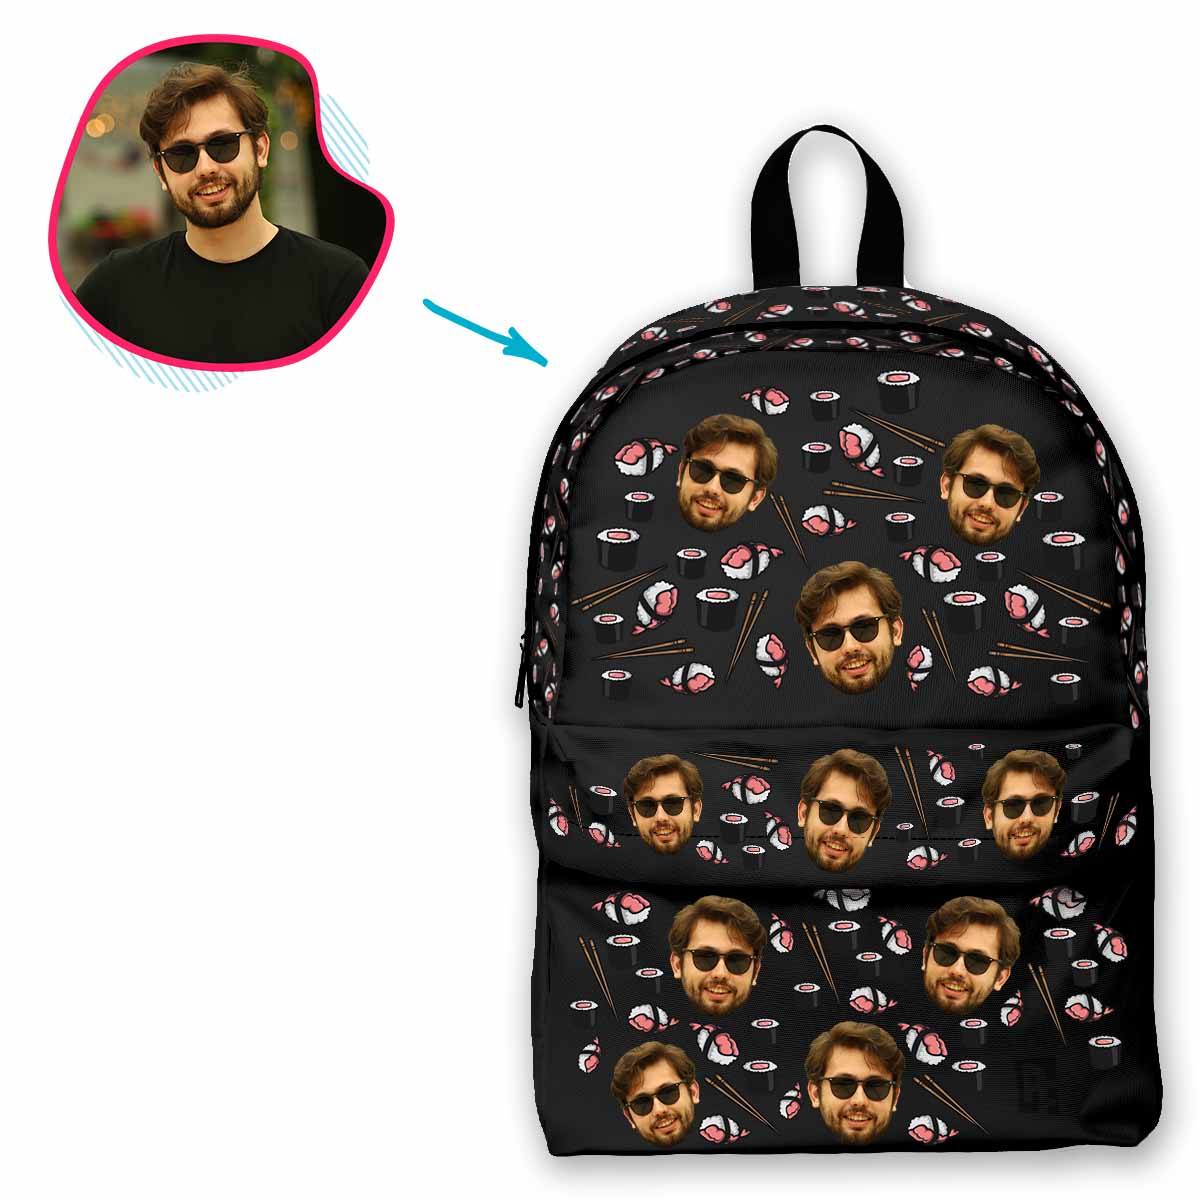 dark Sushi classic backpack personalized with photo of face printed on it